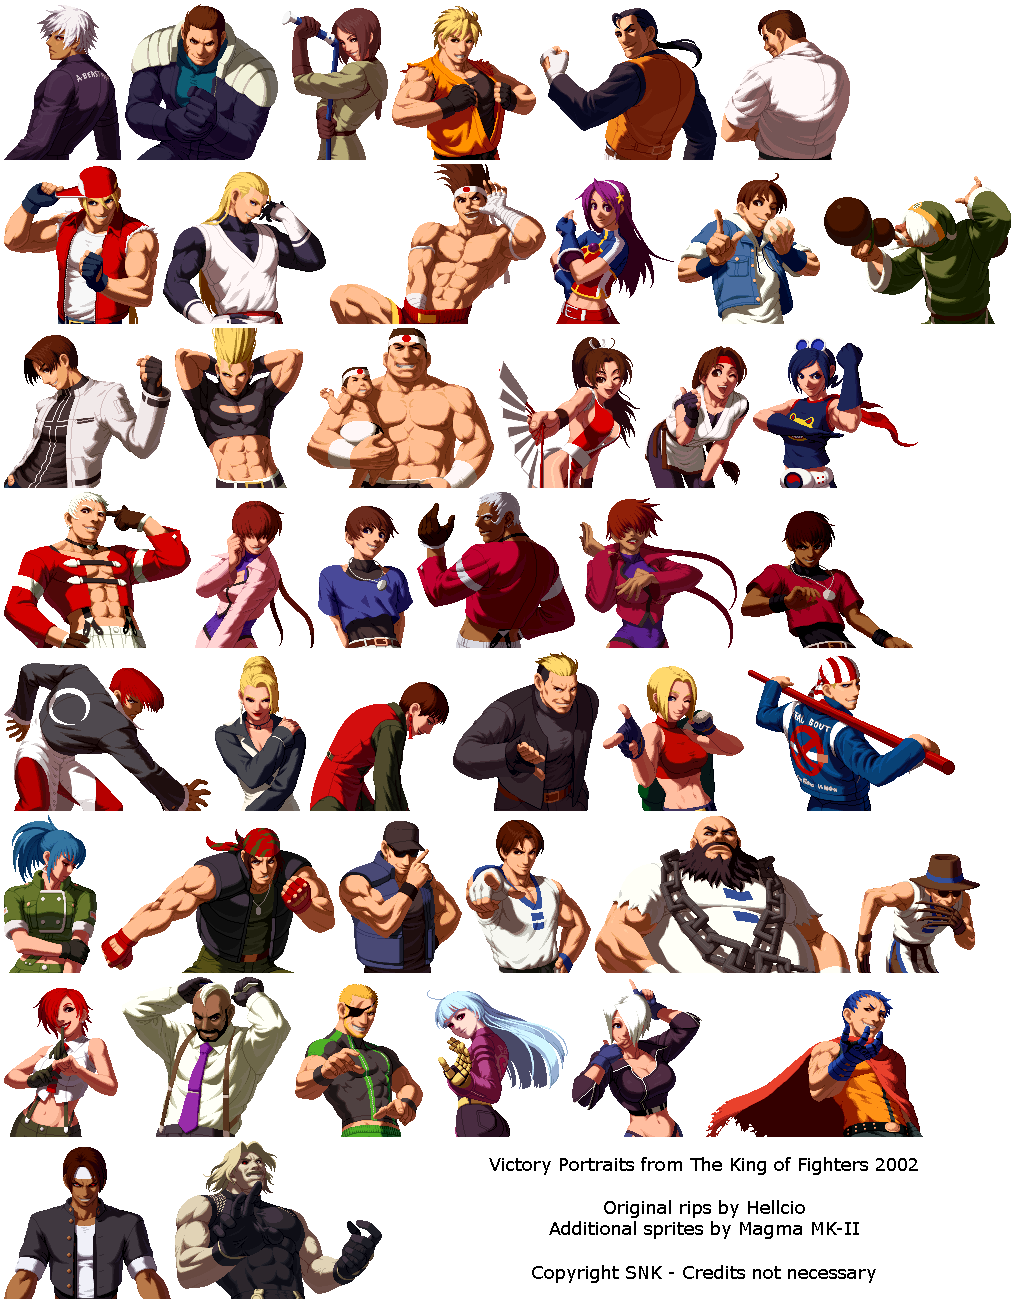 The King of Fighters 2002 - Victory Portraits